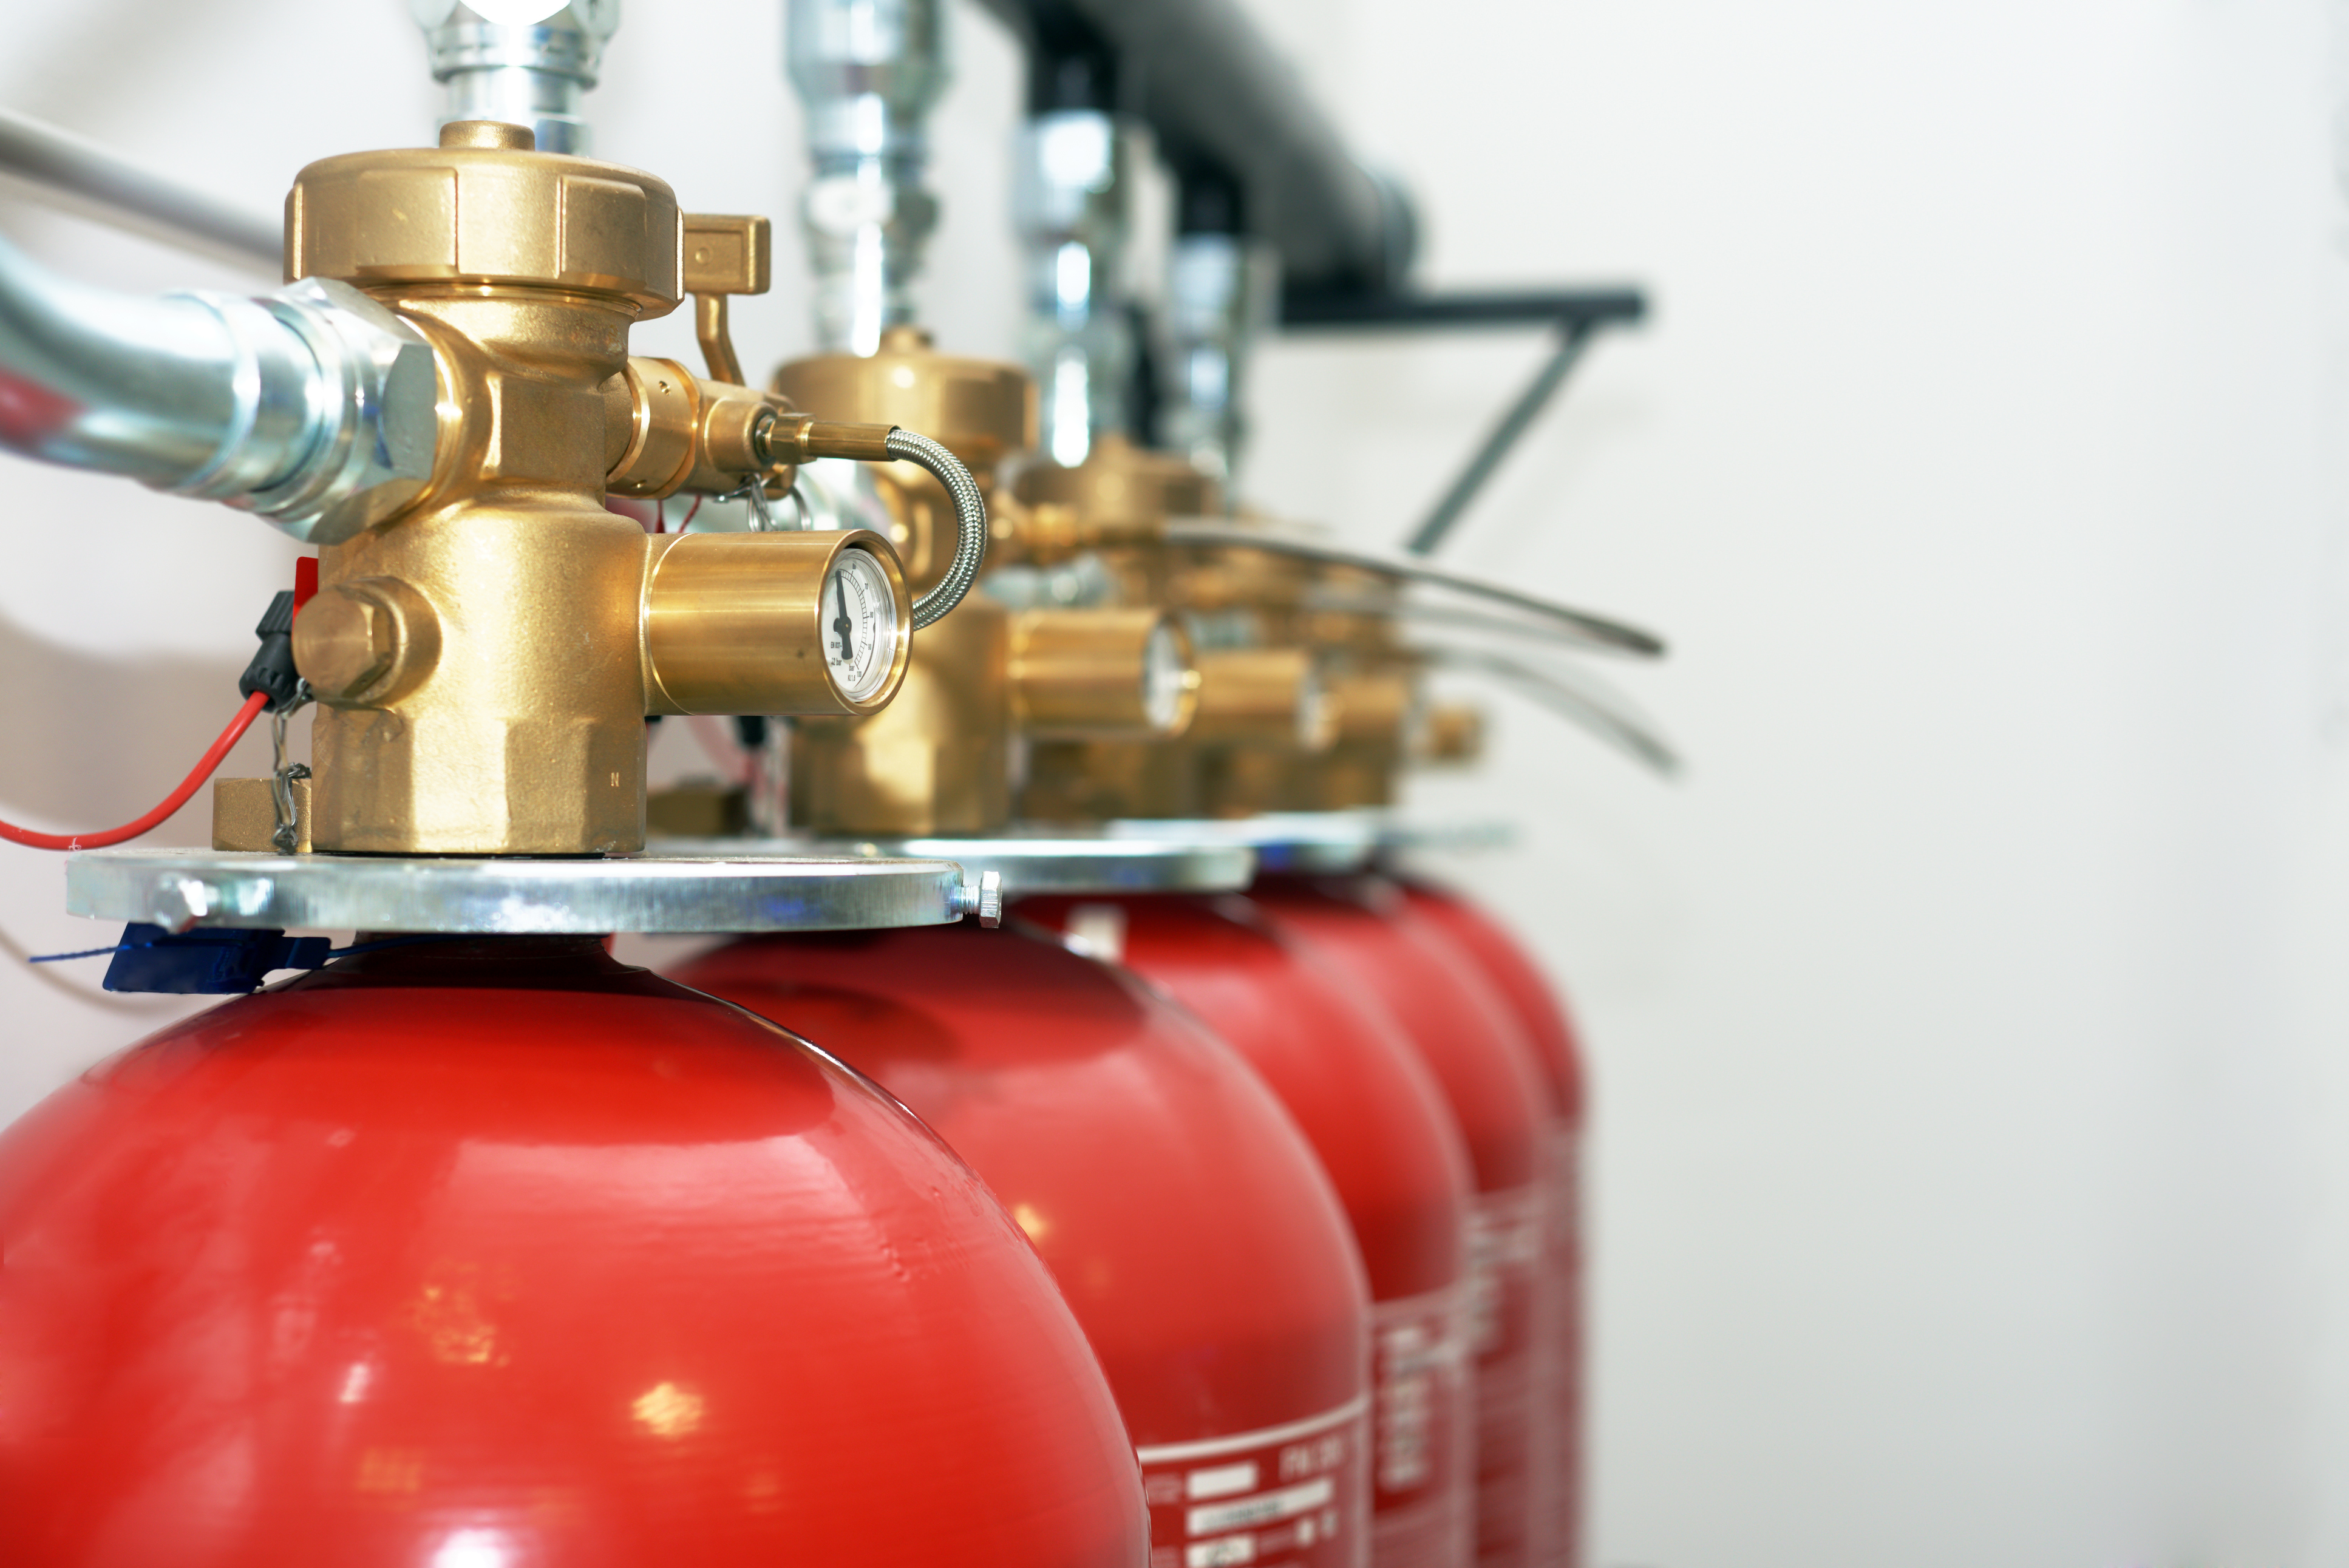 Large CO2 fire extinguishers in a room